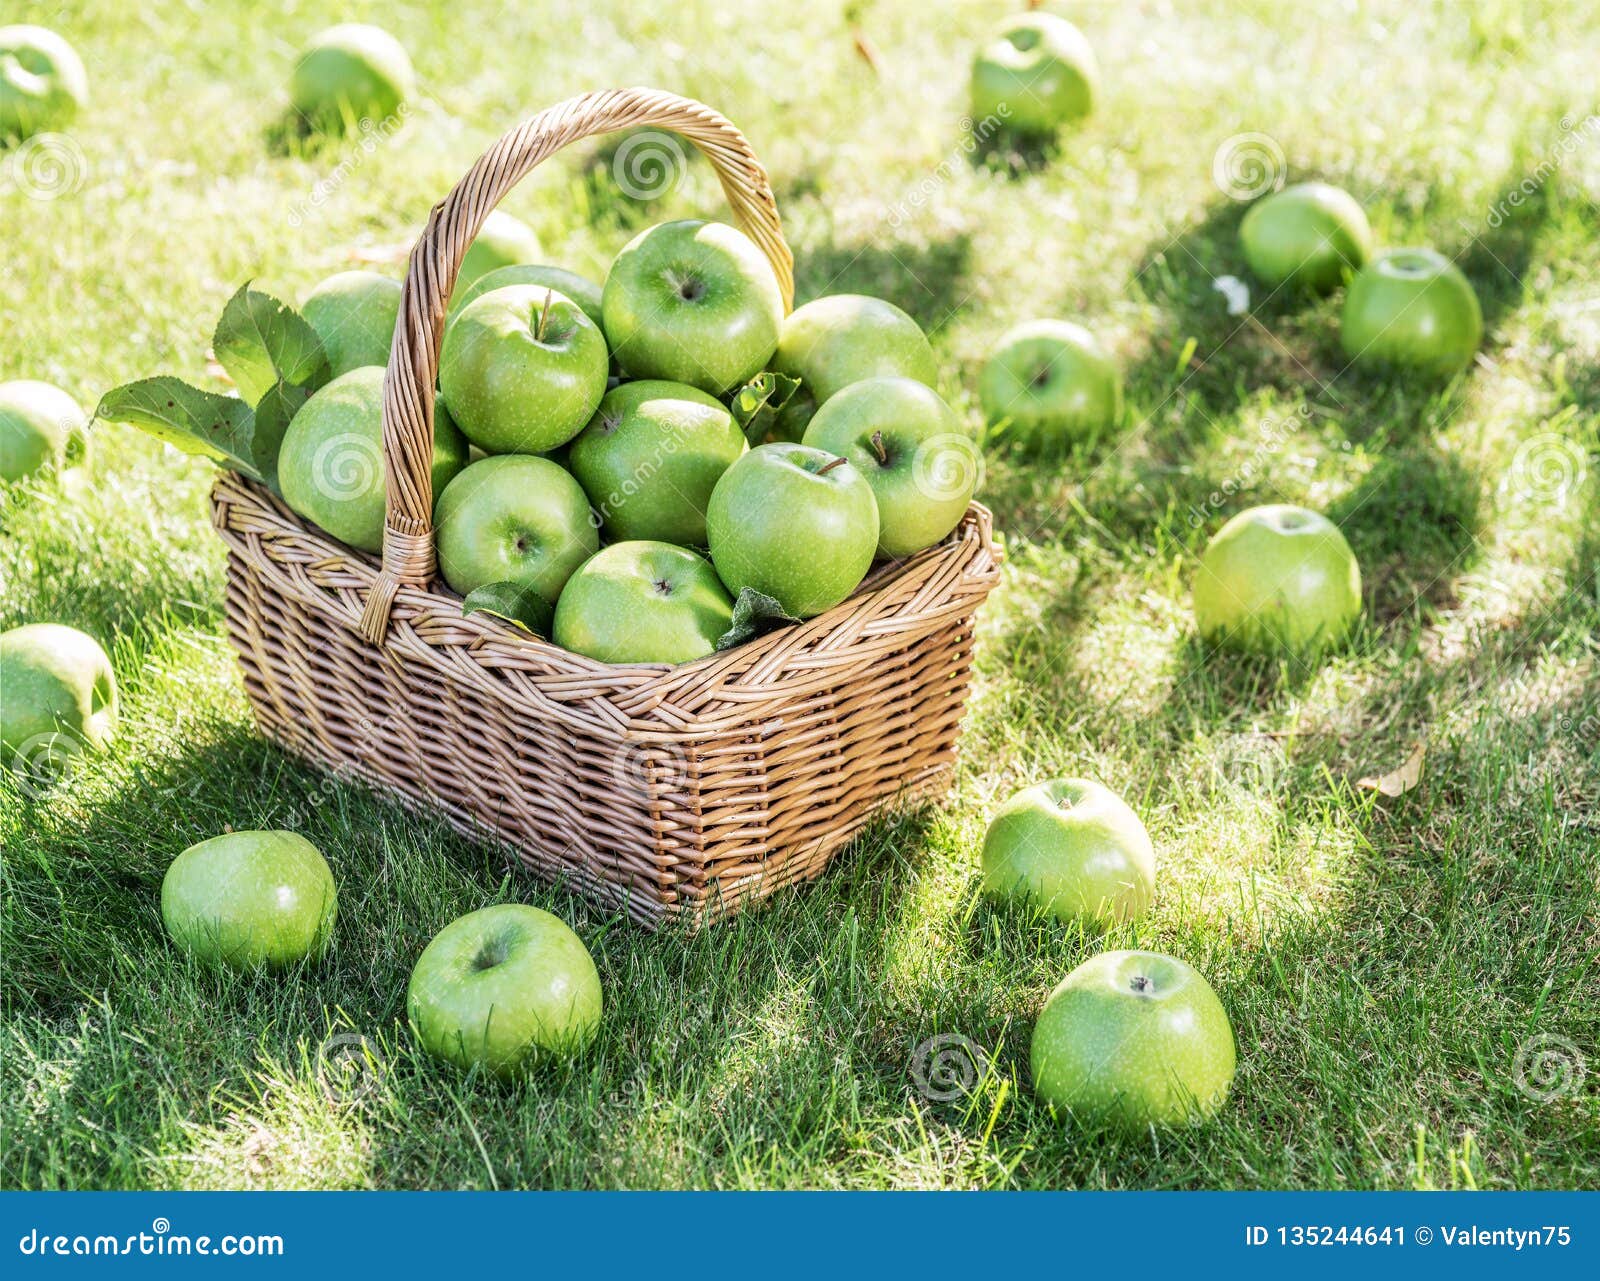 Apple Harvest Ripe Green Apples In The Basket On The Green Grass Stock